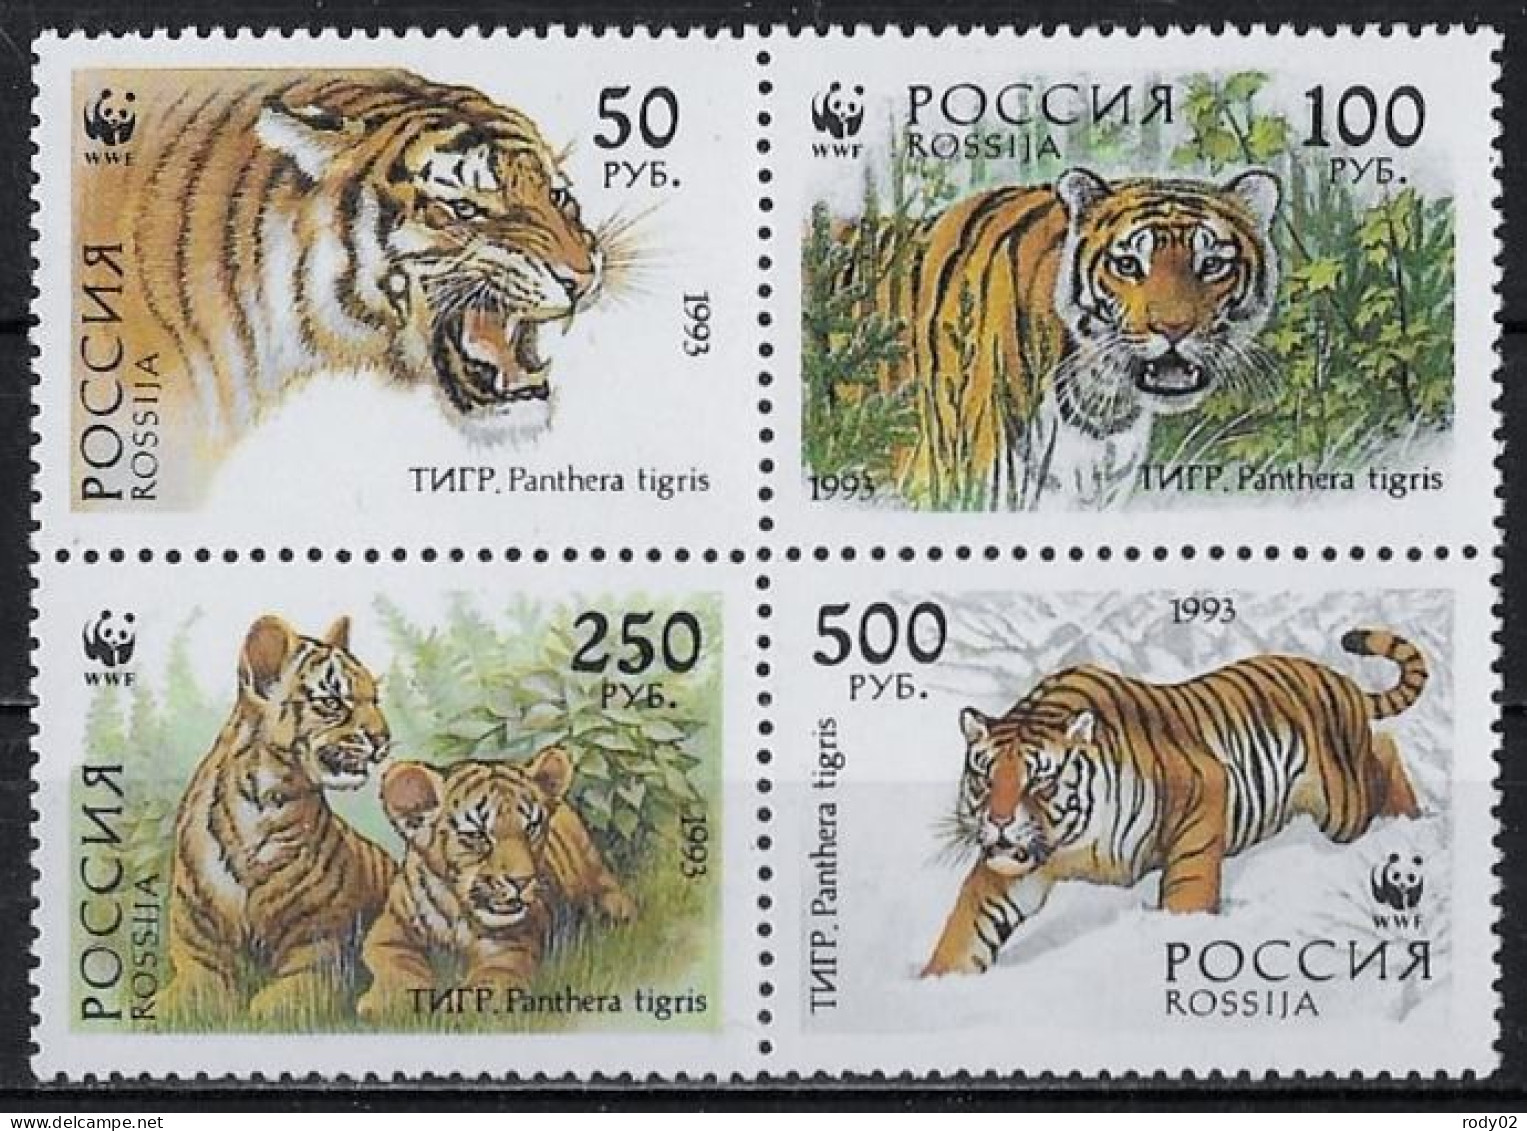 RUSSIE - ANIMAUX SAUVAGES - TIGRES - WWF - N° 6029 A 6032 - NEUF** MNH - Felini